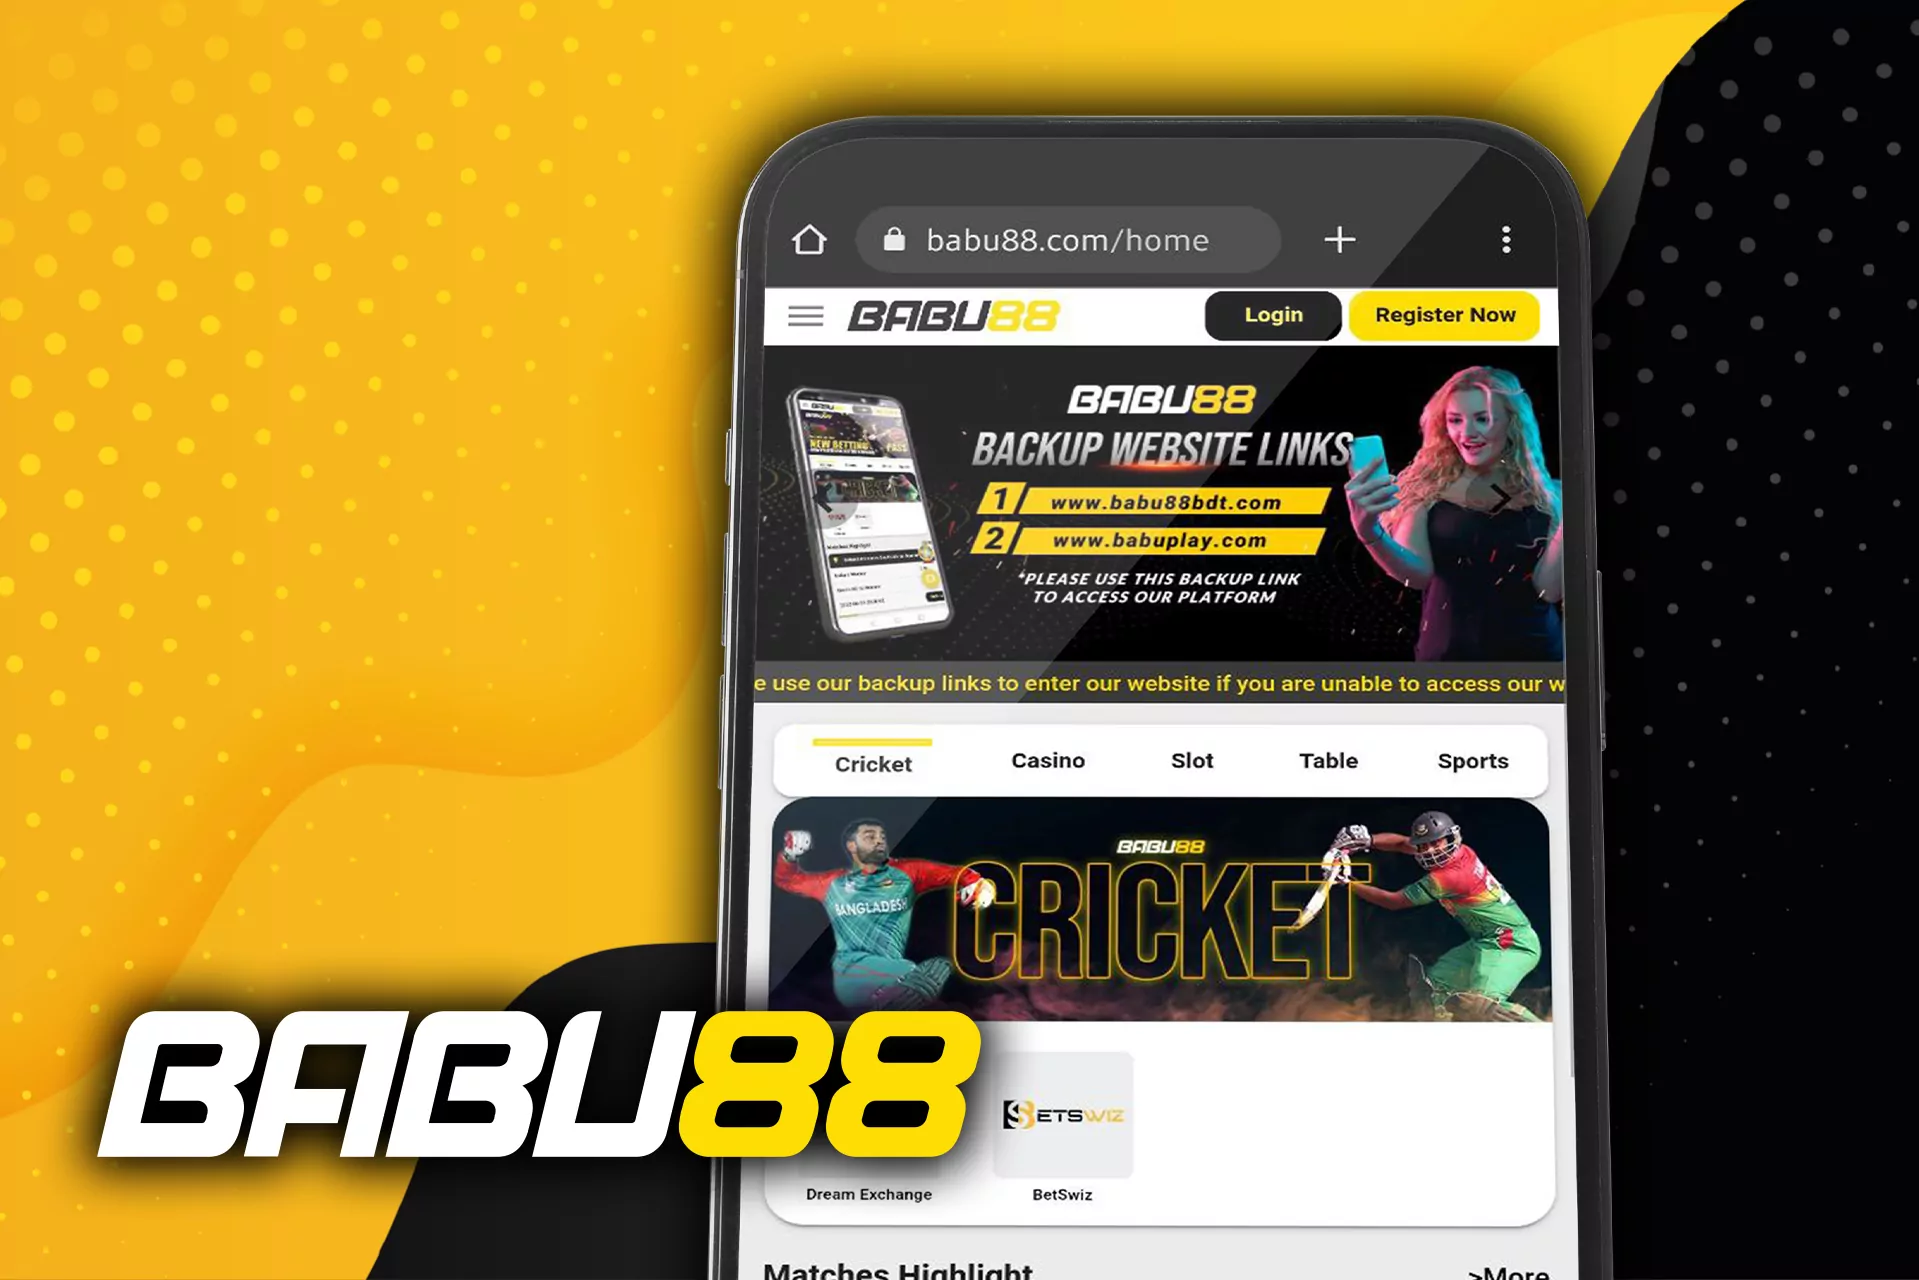 You can also use the browser version of the site instead of the Babu88 app.